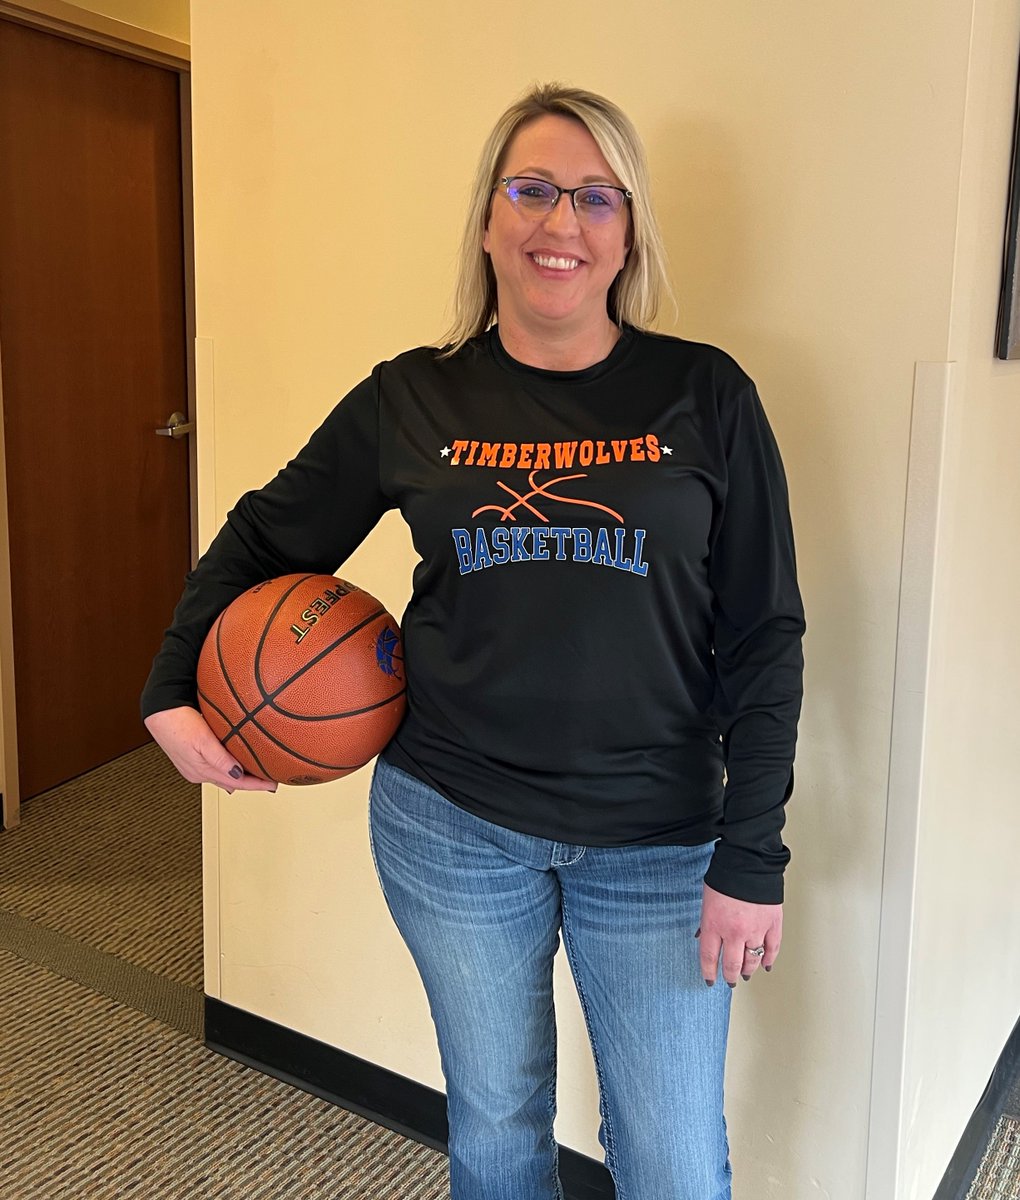 Its Sports Day! We love seeing the team have fun while they raise funds to benefit Children’s Miracle Network! 
 #peoplewhocare 
@ProvidenceINW
@providence_phc 
@providenceesternwa